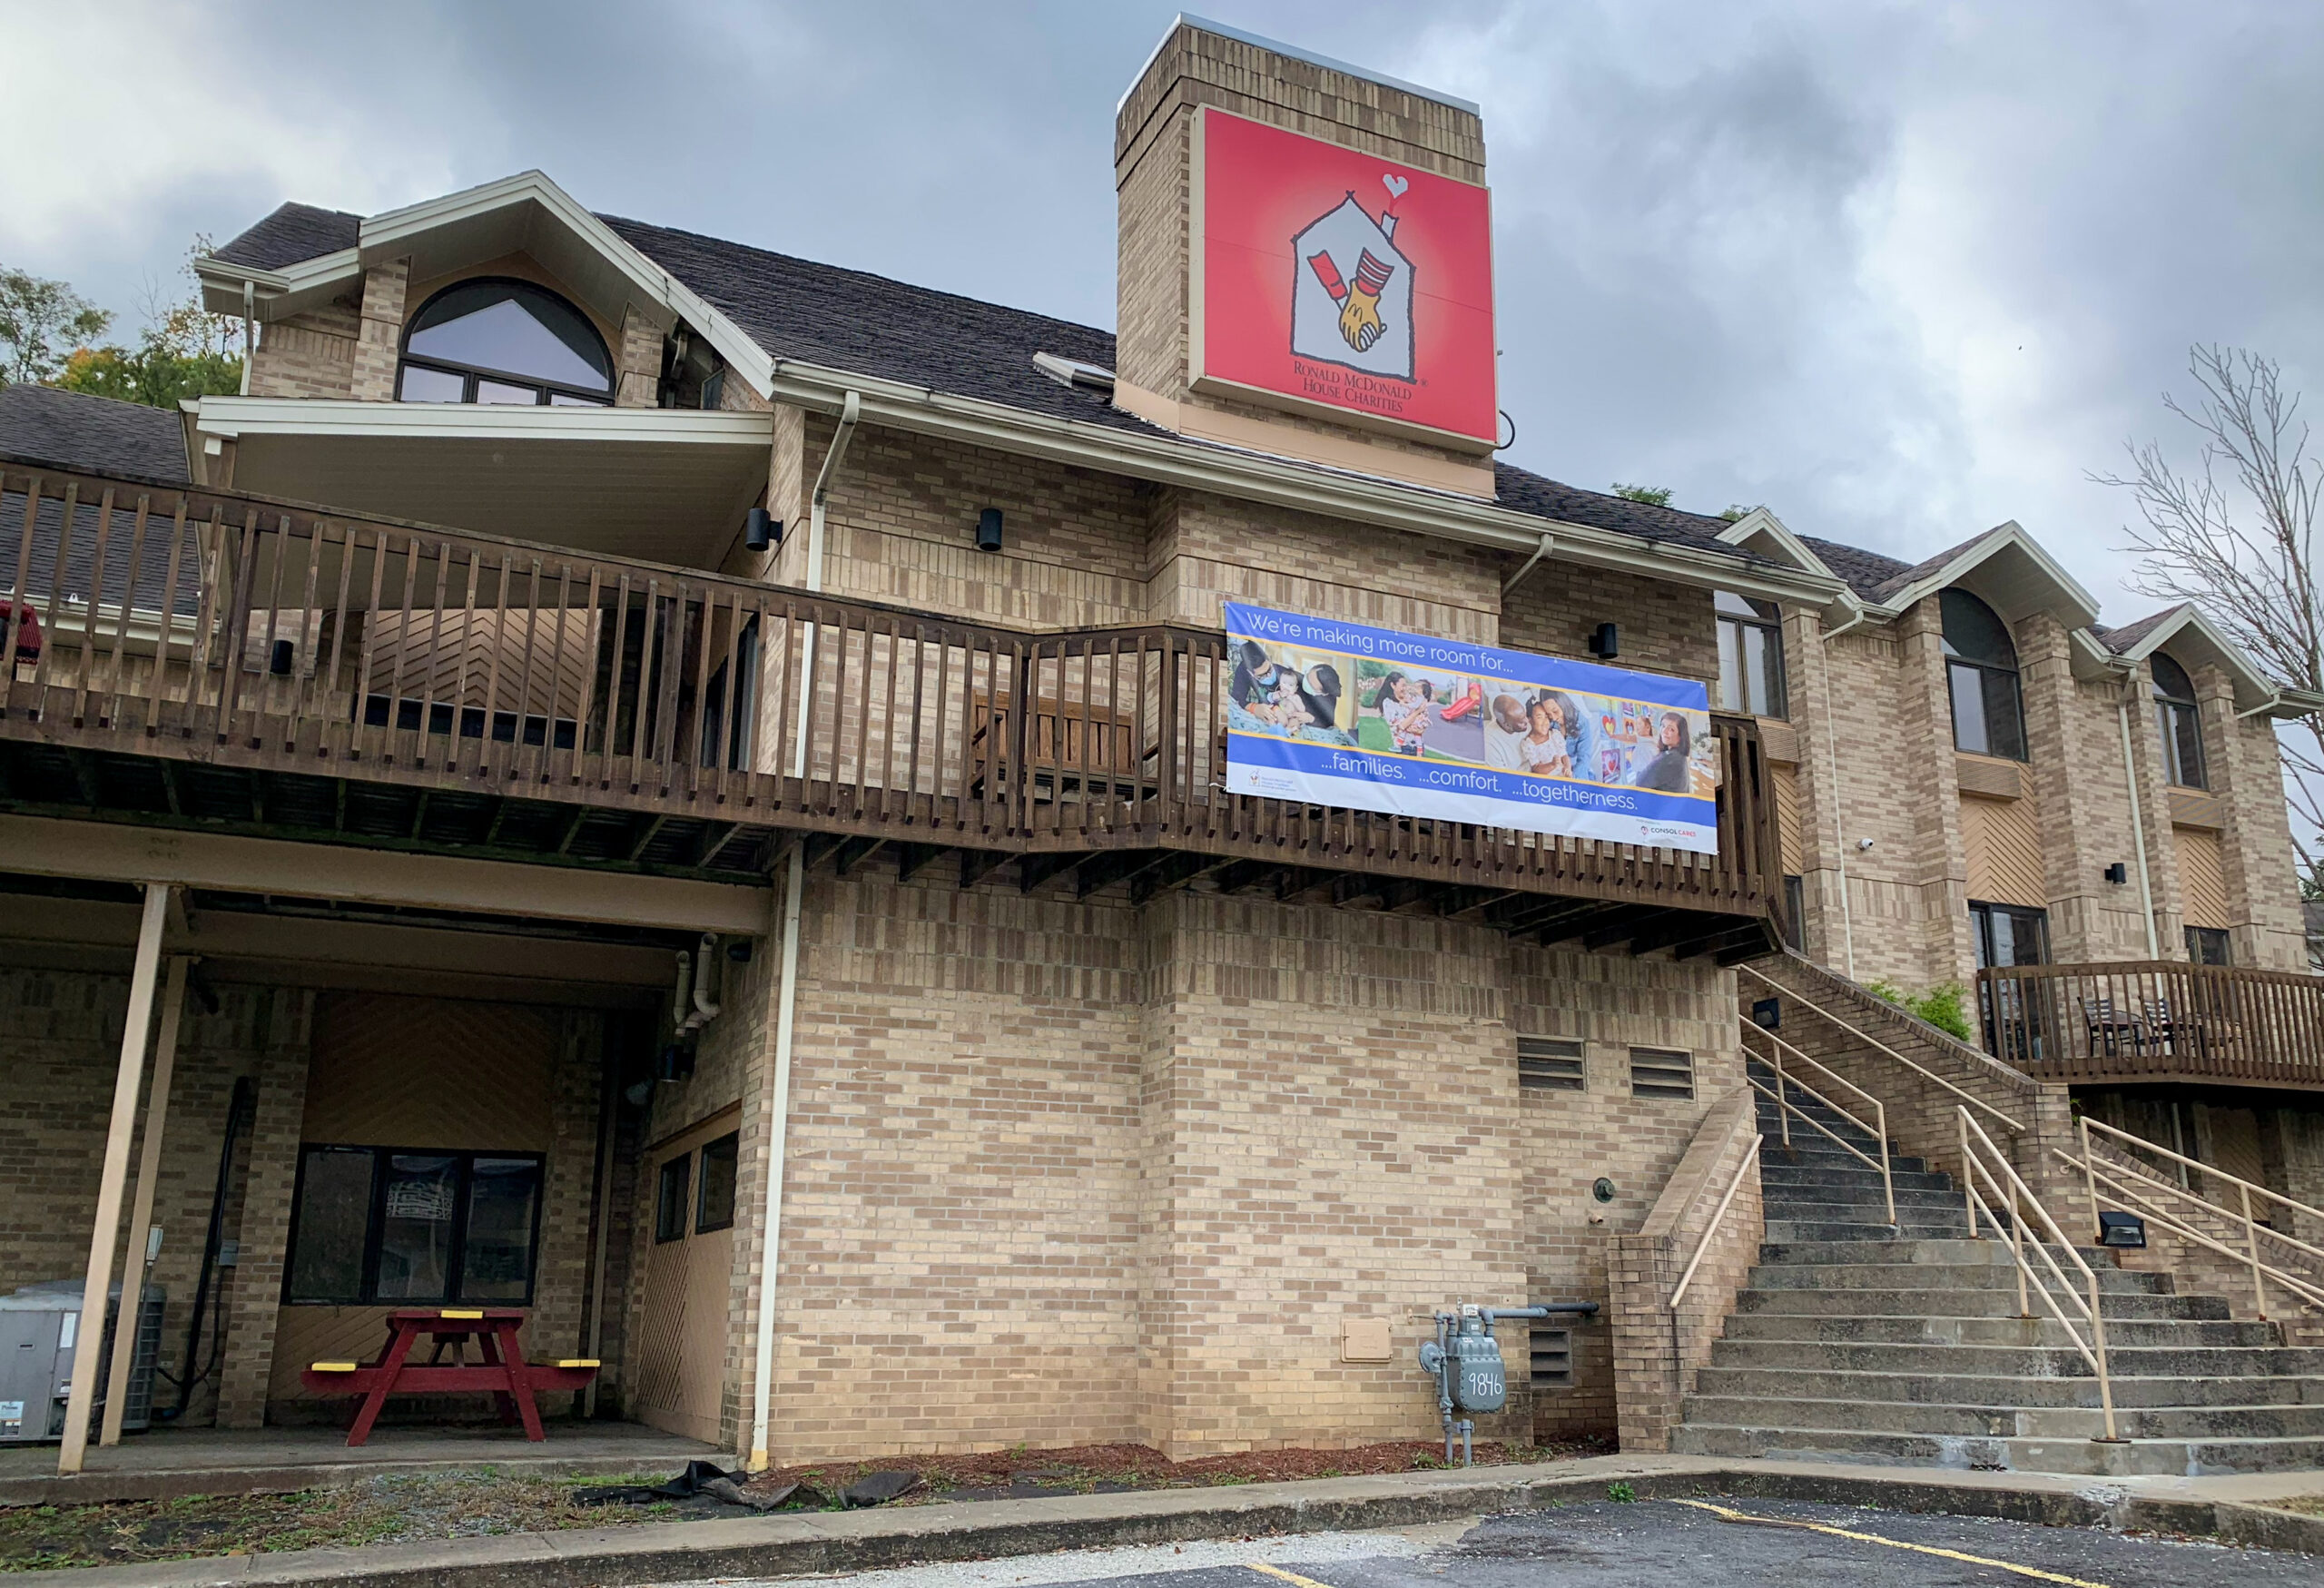 $60,000 fundraiser with local McDonald’s and Pittsburgh Penguins supports projects at Ronald McDonald House Morgantown – Dominion Post